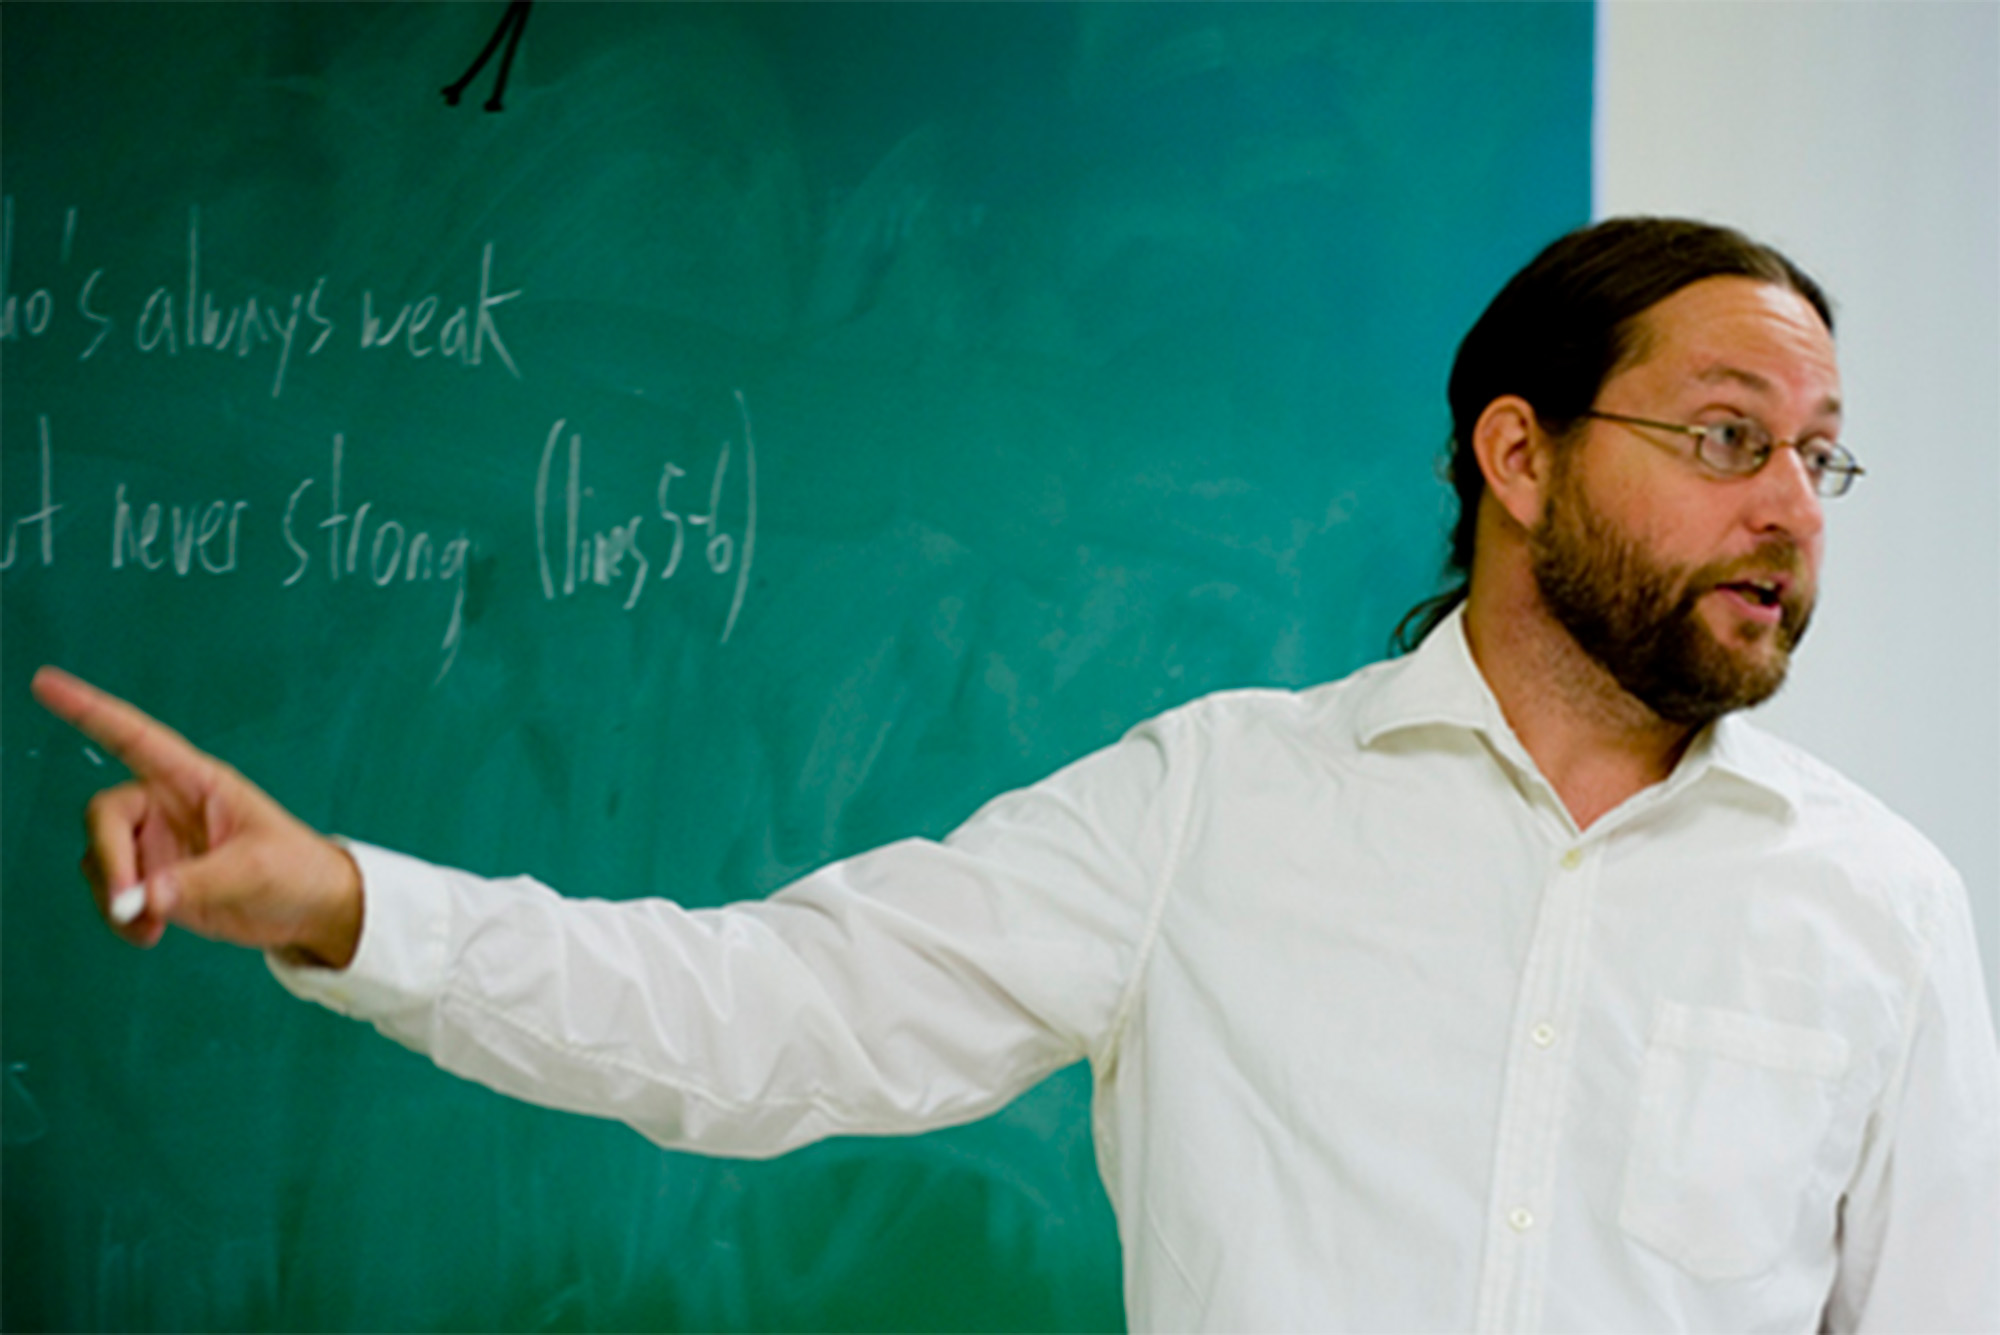 Photo: A professor in a white collared shirt teaching a class in front of a chalkboard